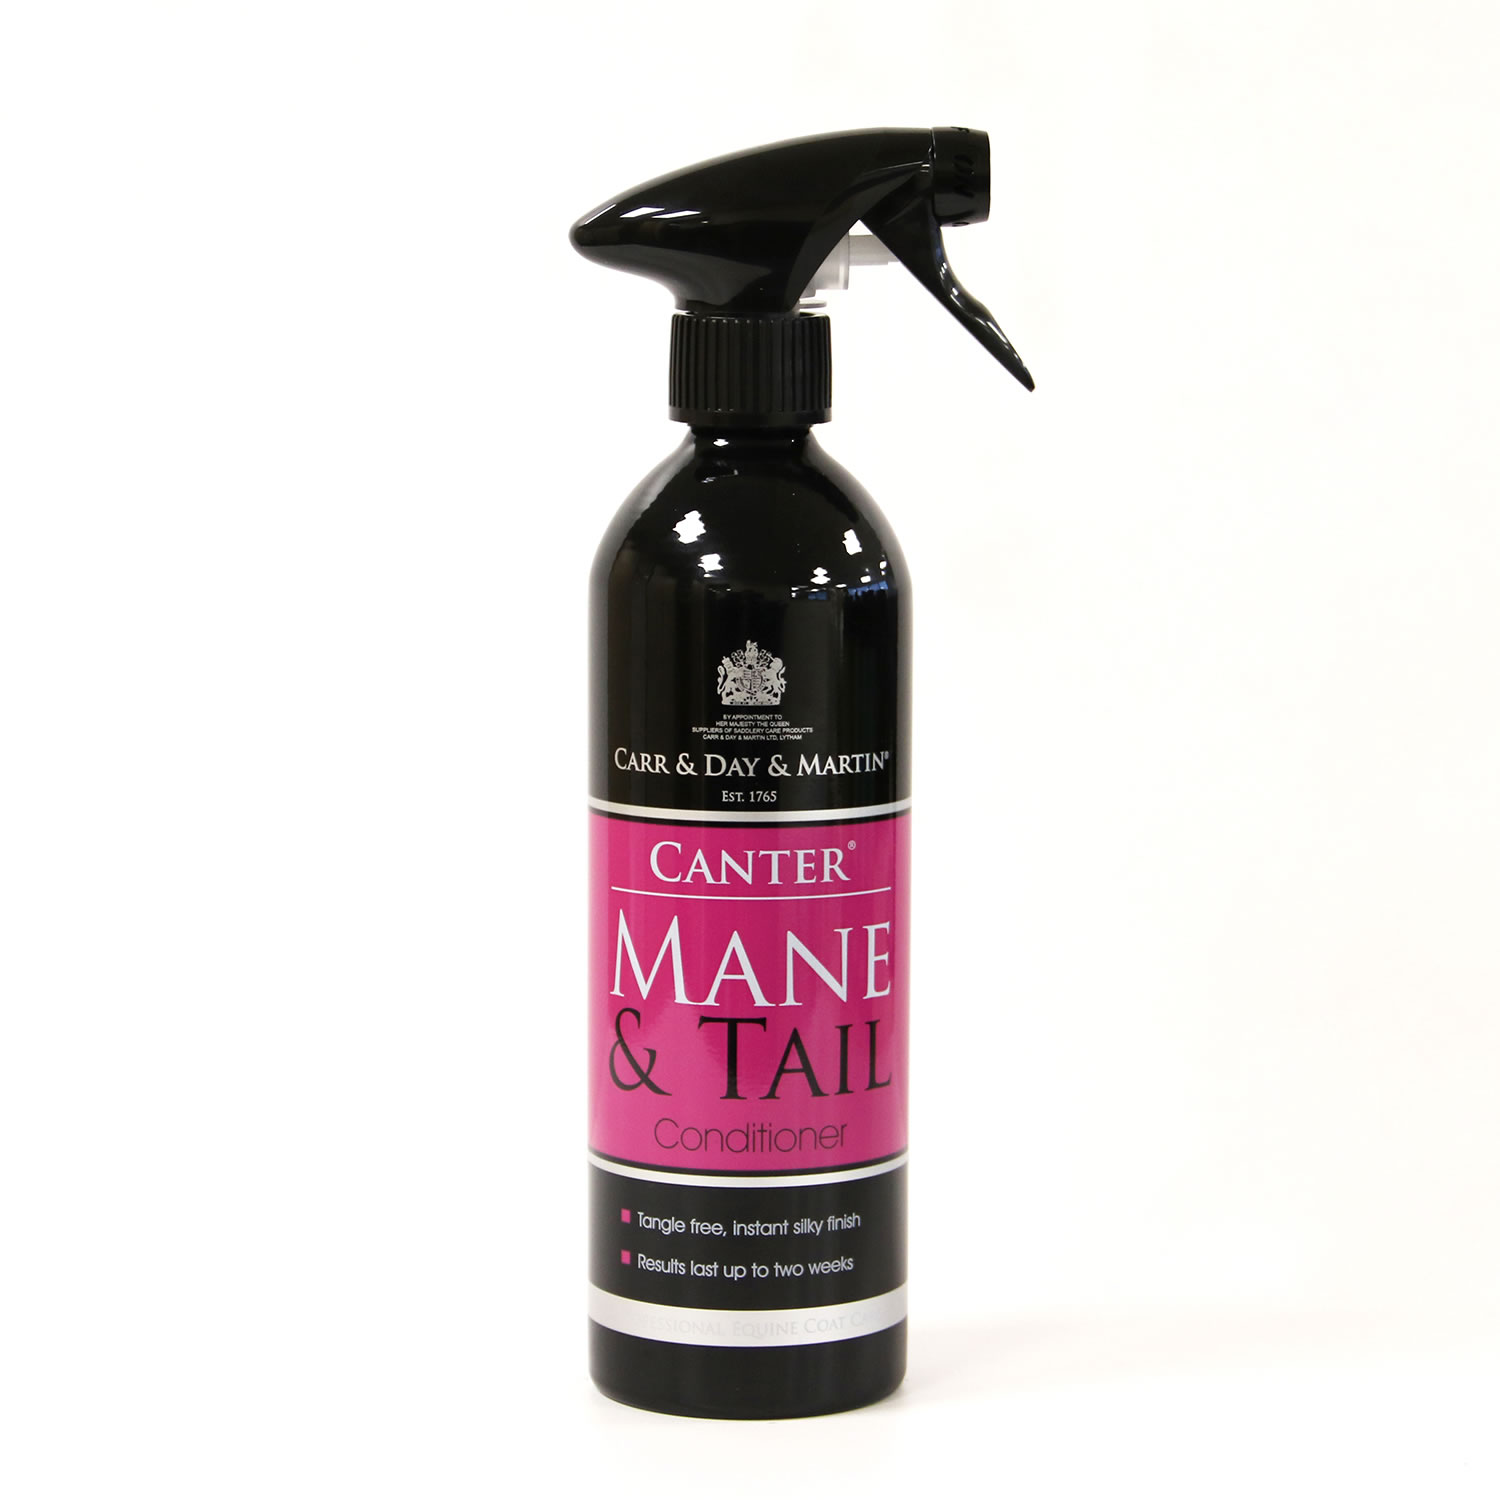 CARR & DAY & MARTIN CANTER MANE & TAIL CONDITIONER 500 ML 500 ML SPRAY BOTTLE